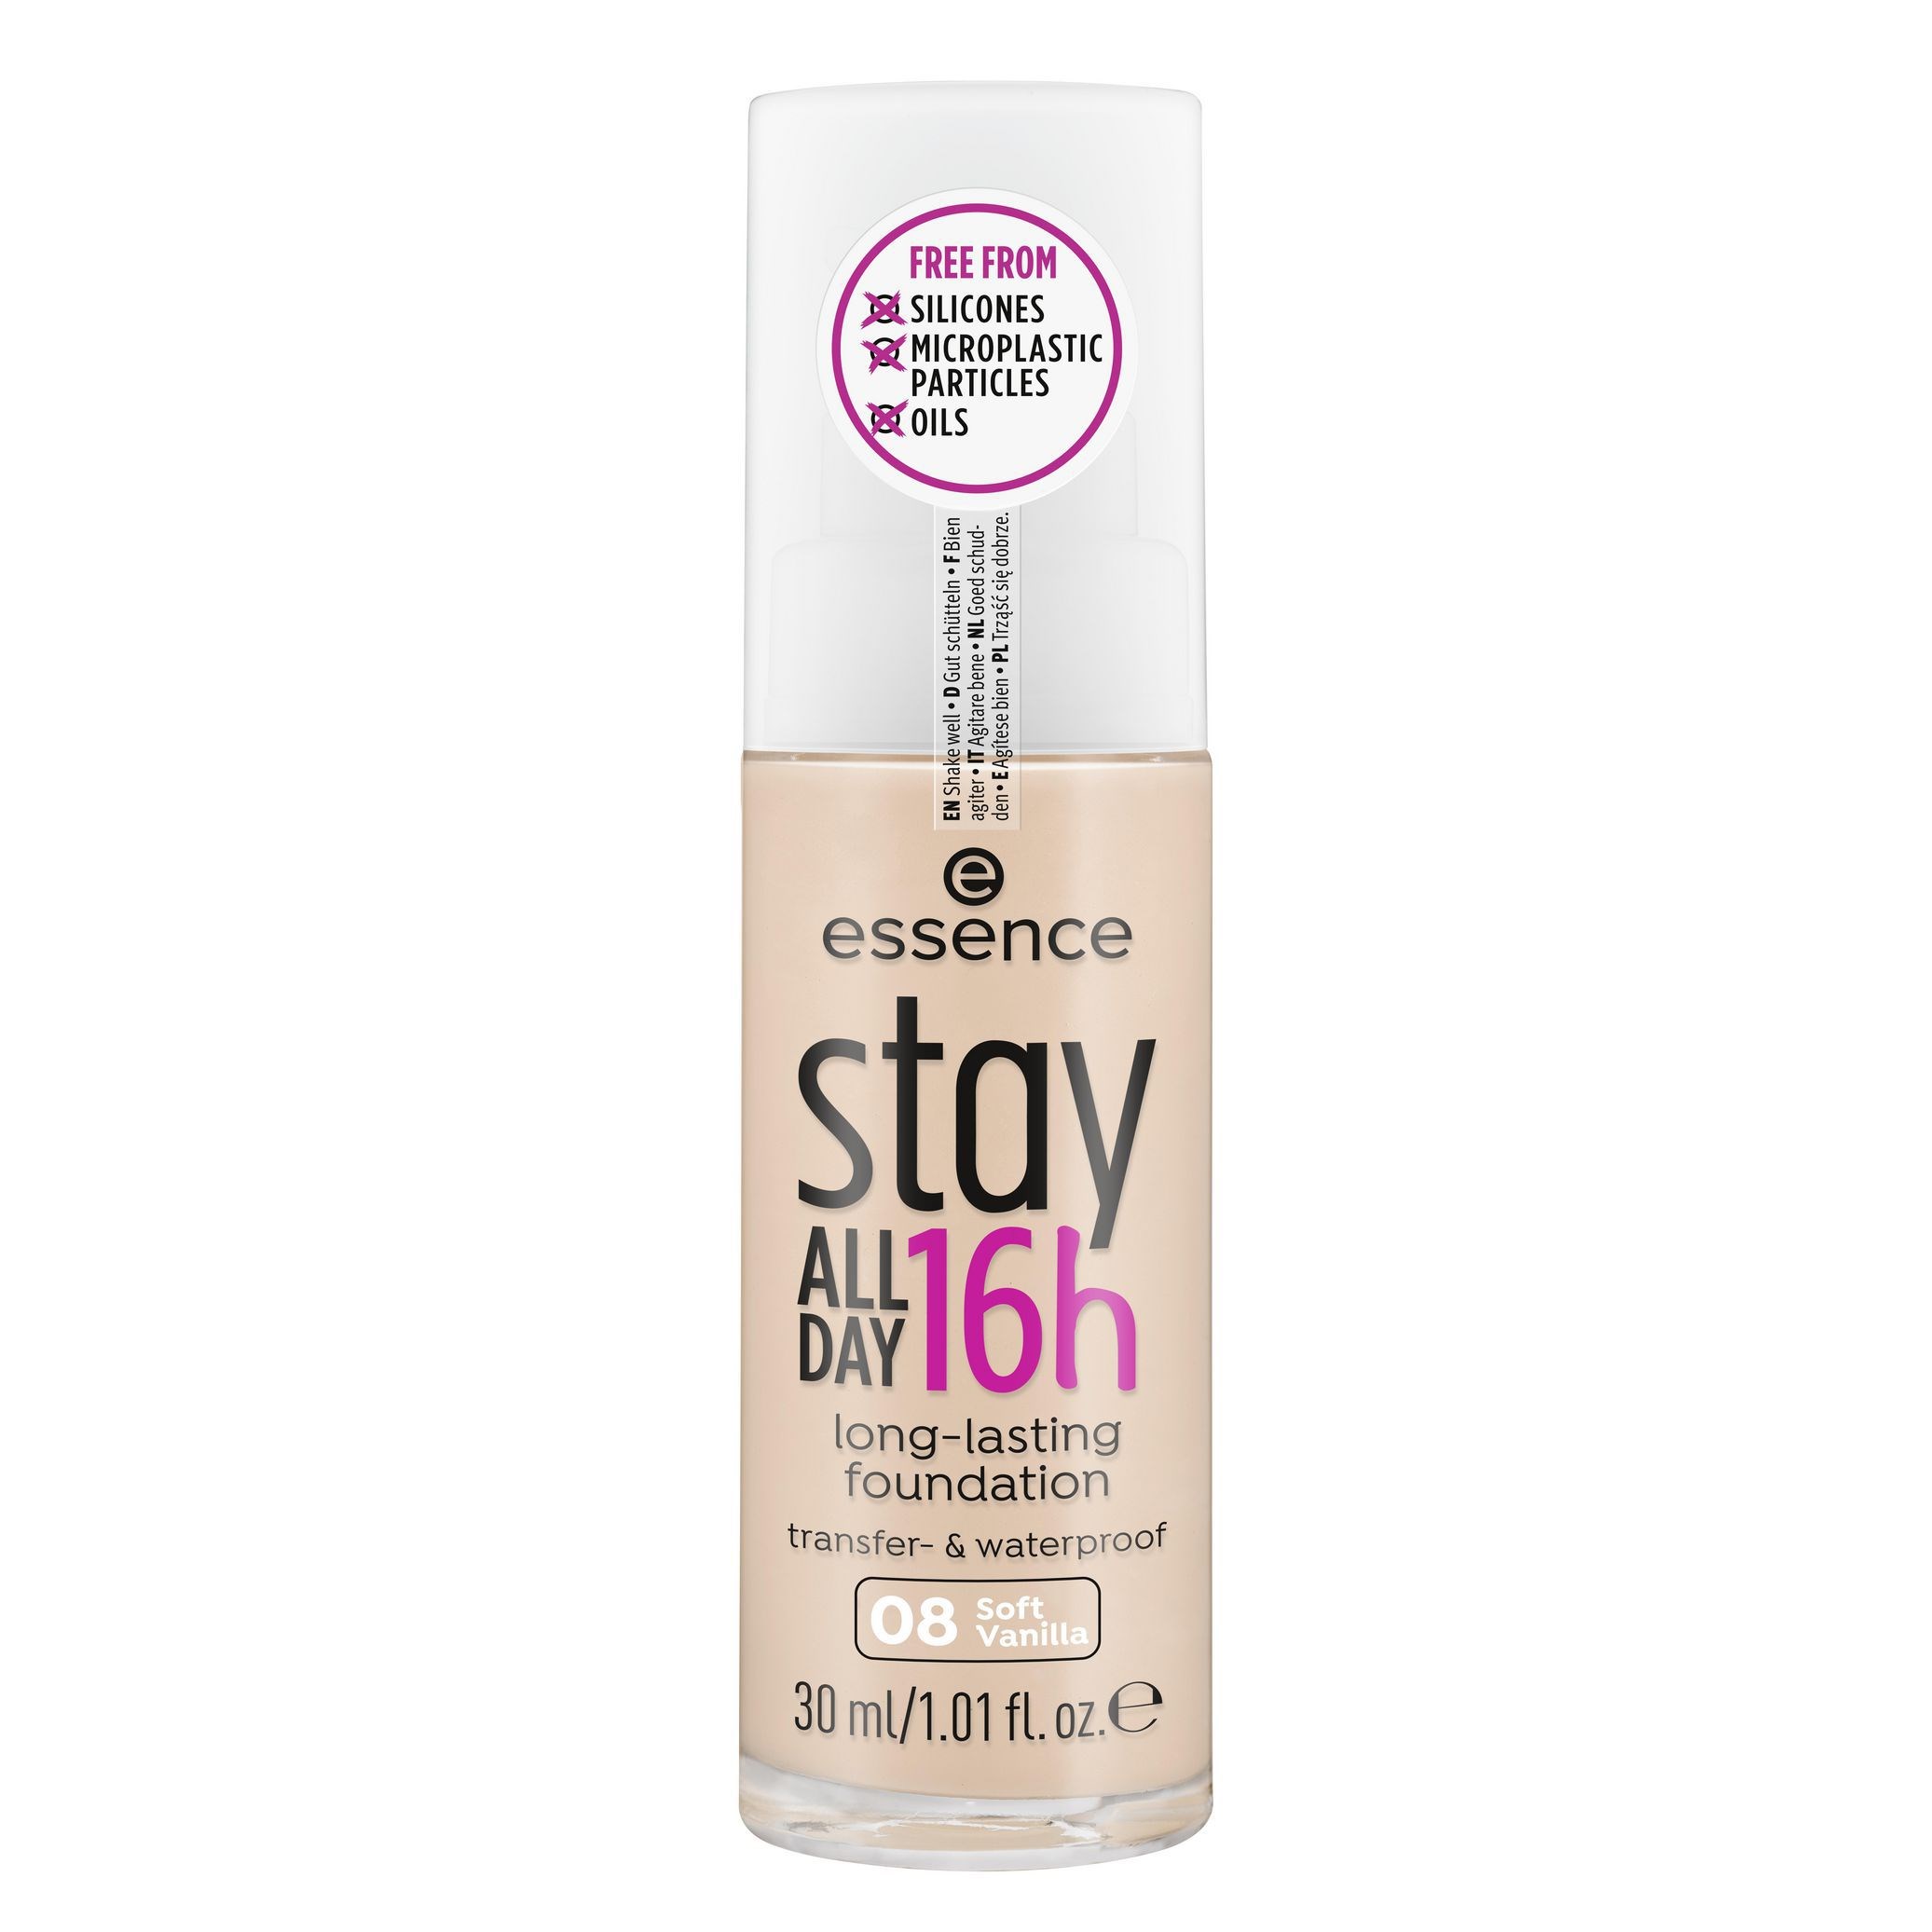 essence Stay All Day Long-Lasting Foundation, 30 ml